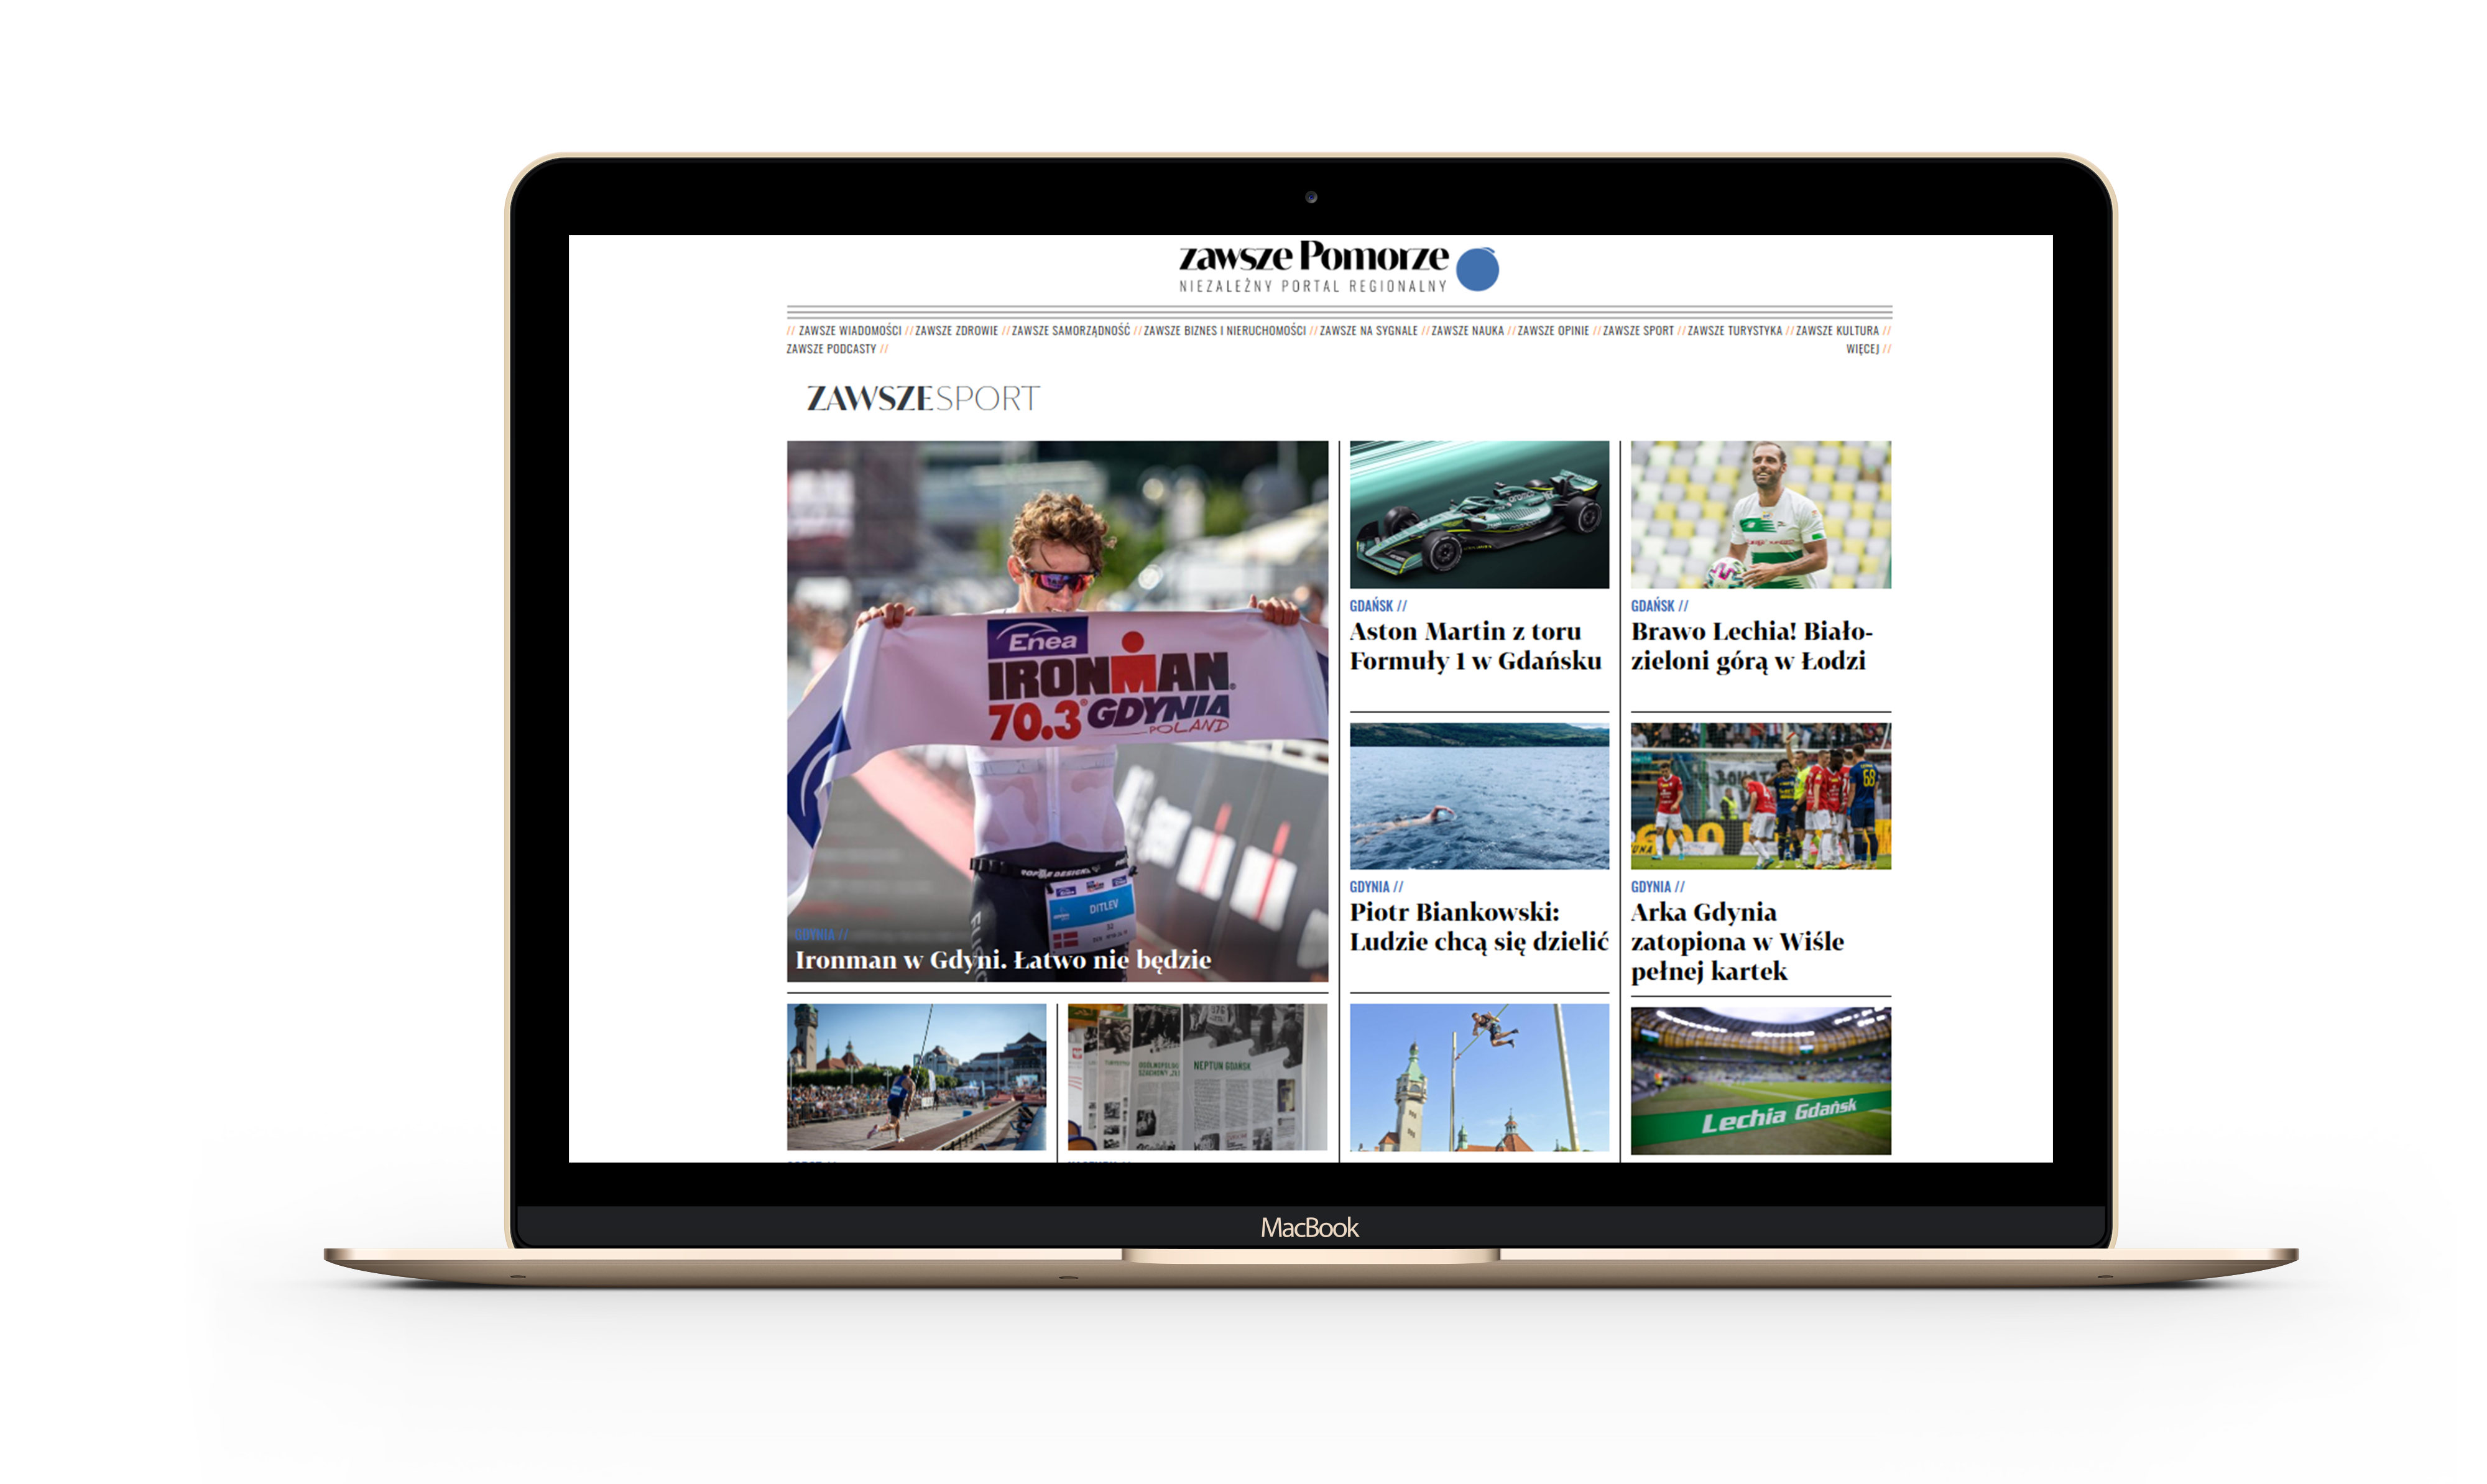 The Zawsze Pomorze newspaper website was created in Thunder CMS intended for the media industry